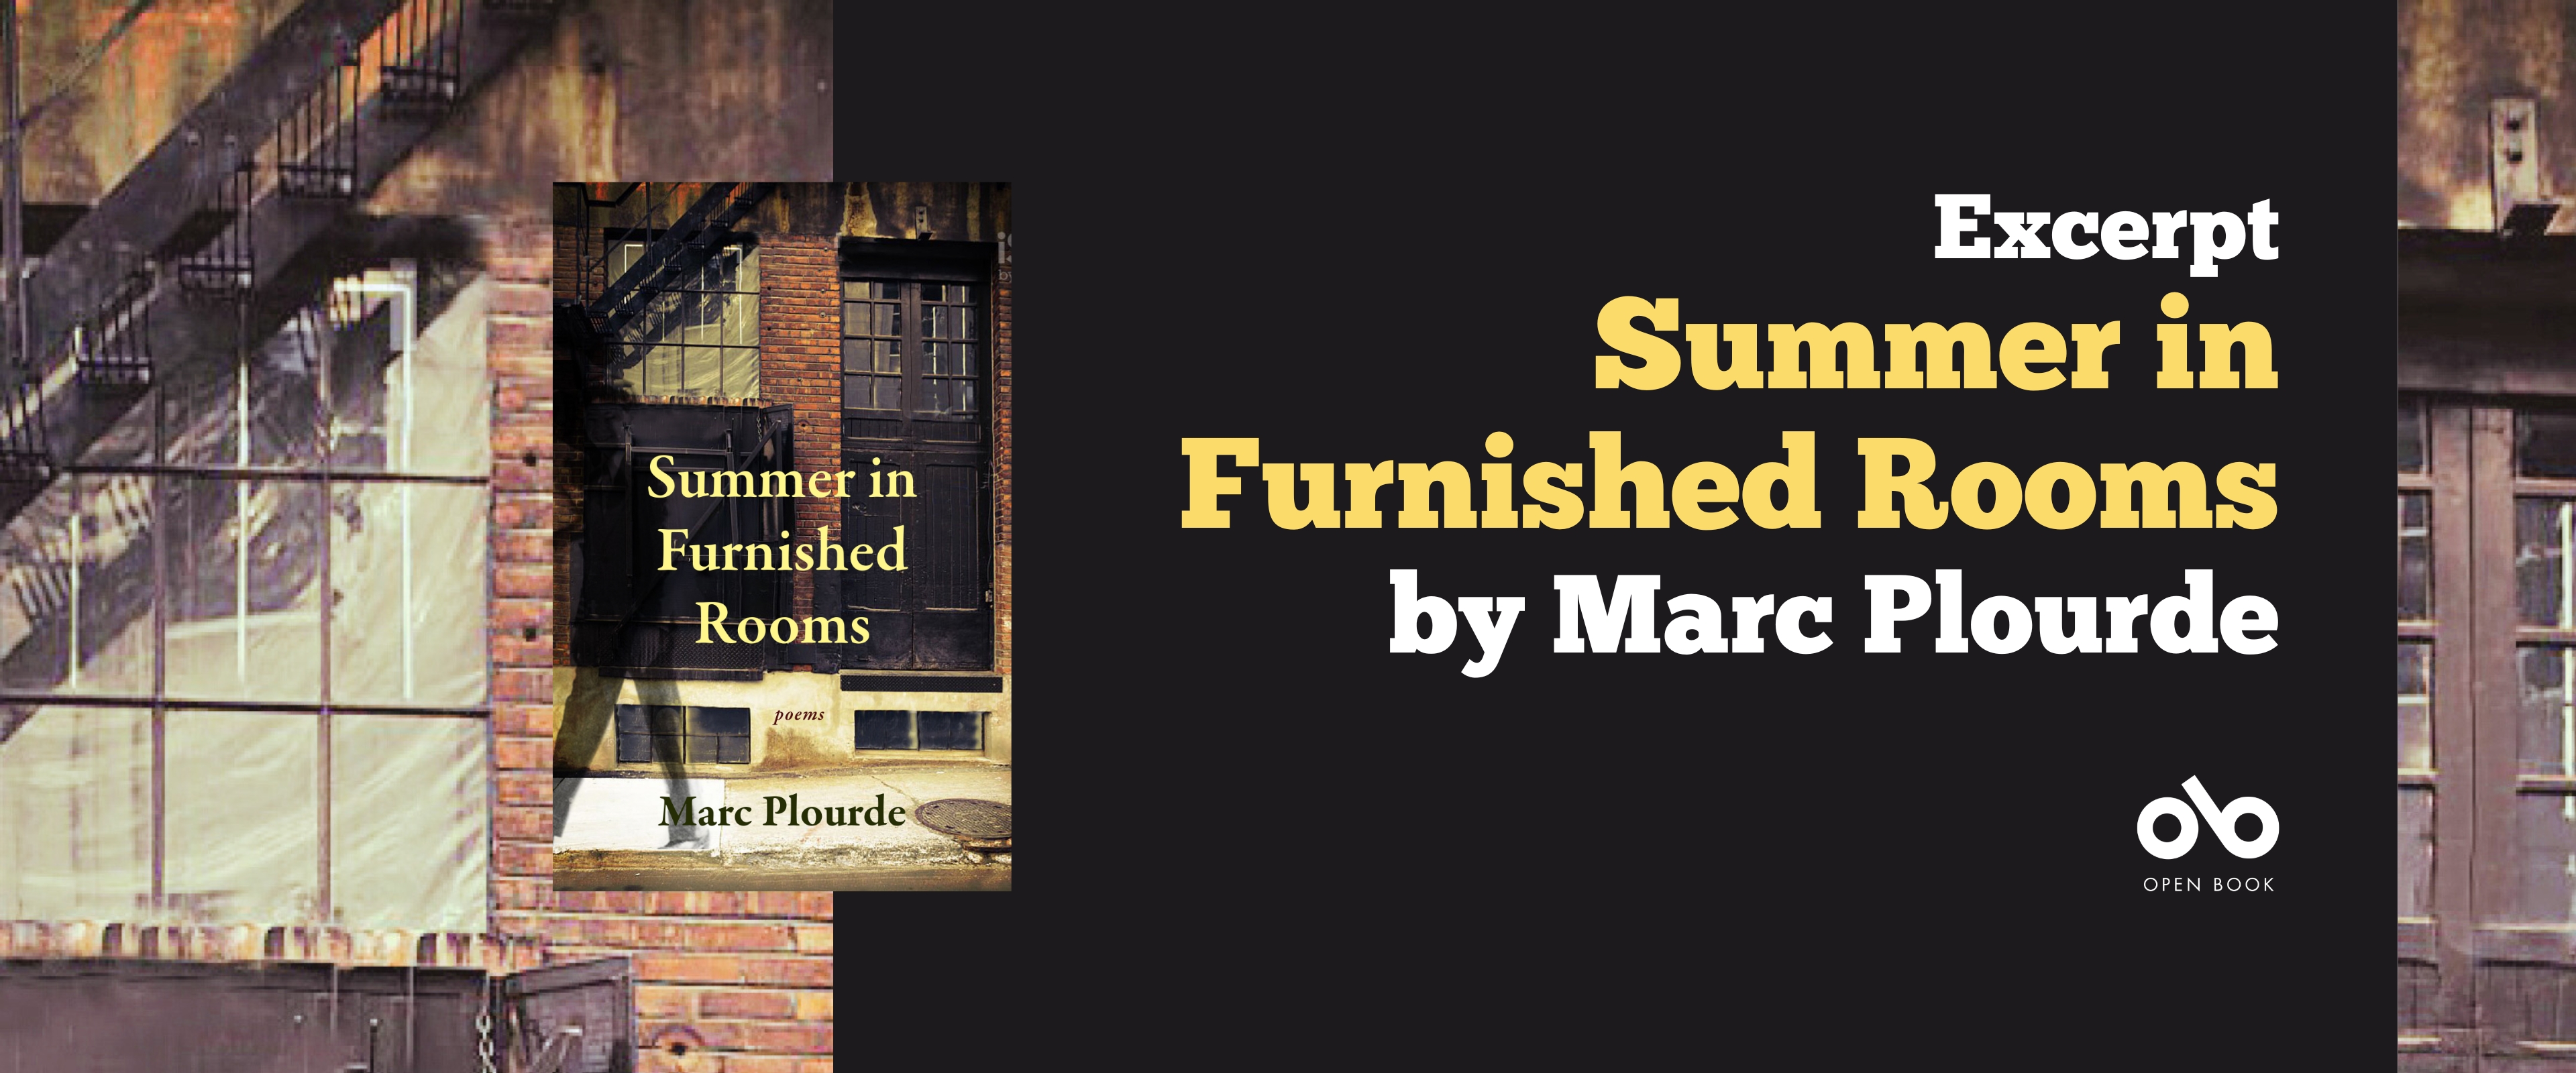 Excerpt from Summer in Furnished Rooms by Marc Plourde. Banner image of text overlaid on dark background and Open Book logo below. Image of book cover to the left and old brick building facade as main background to all.